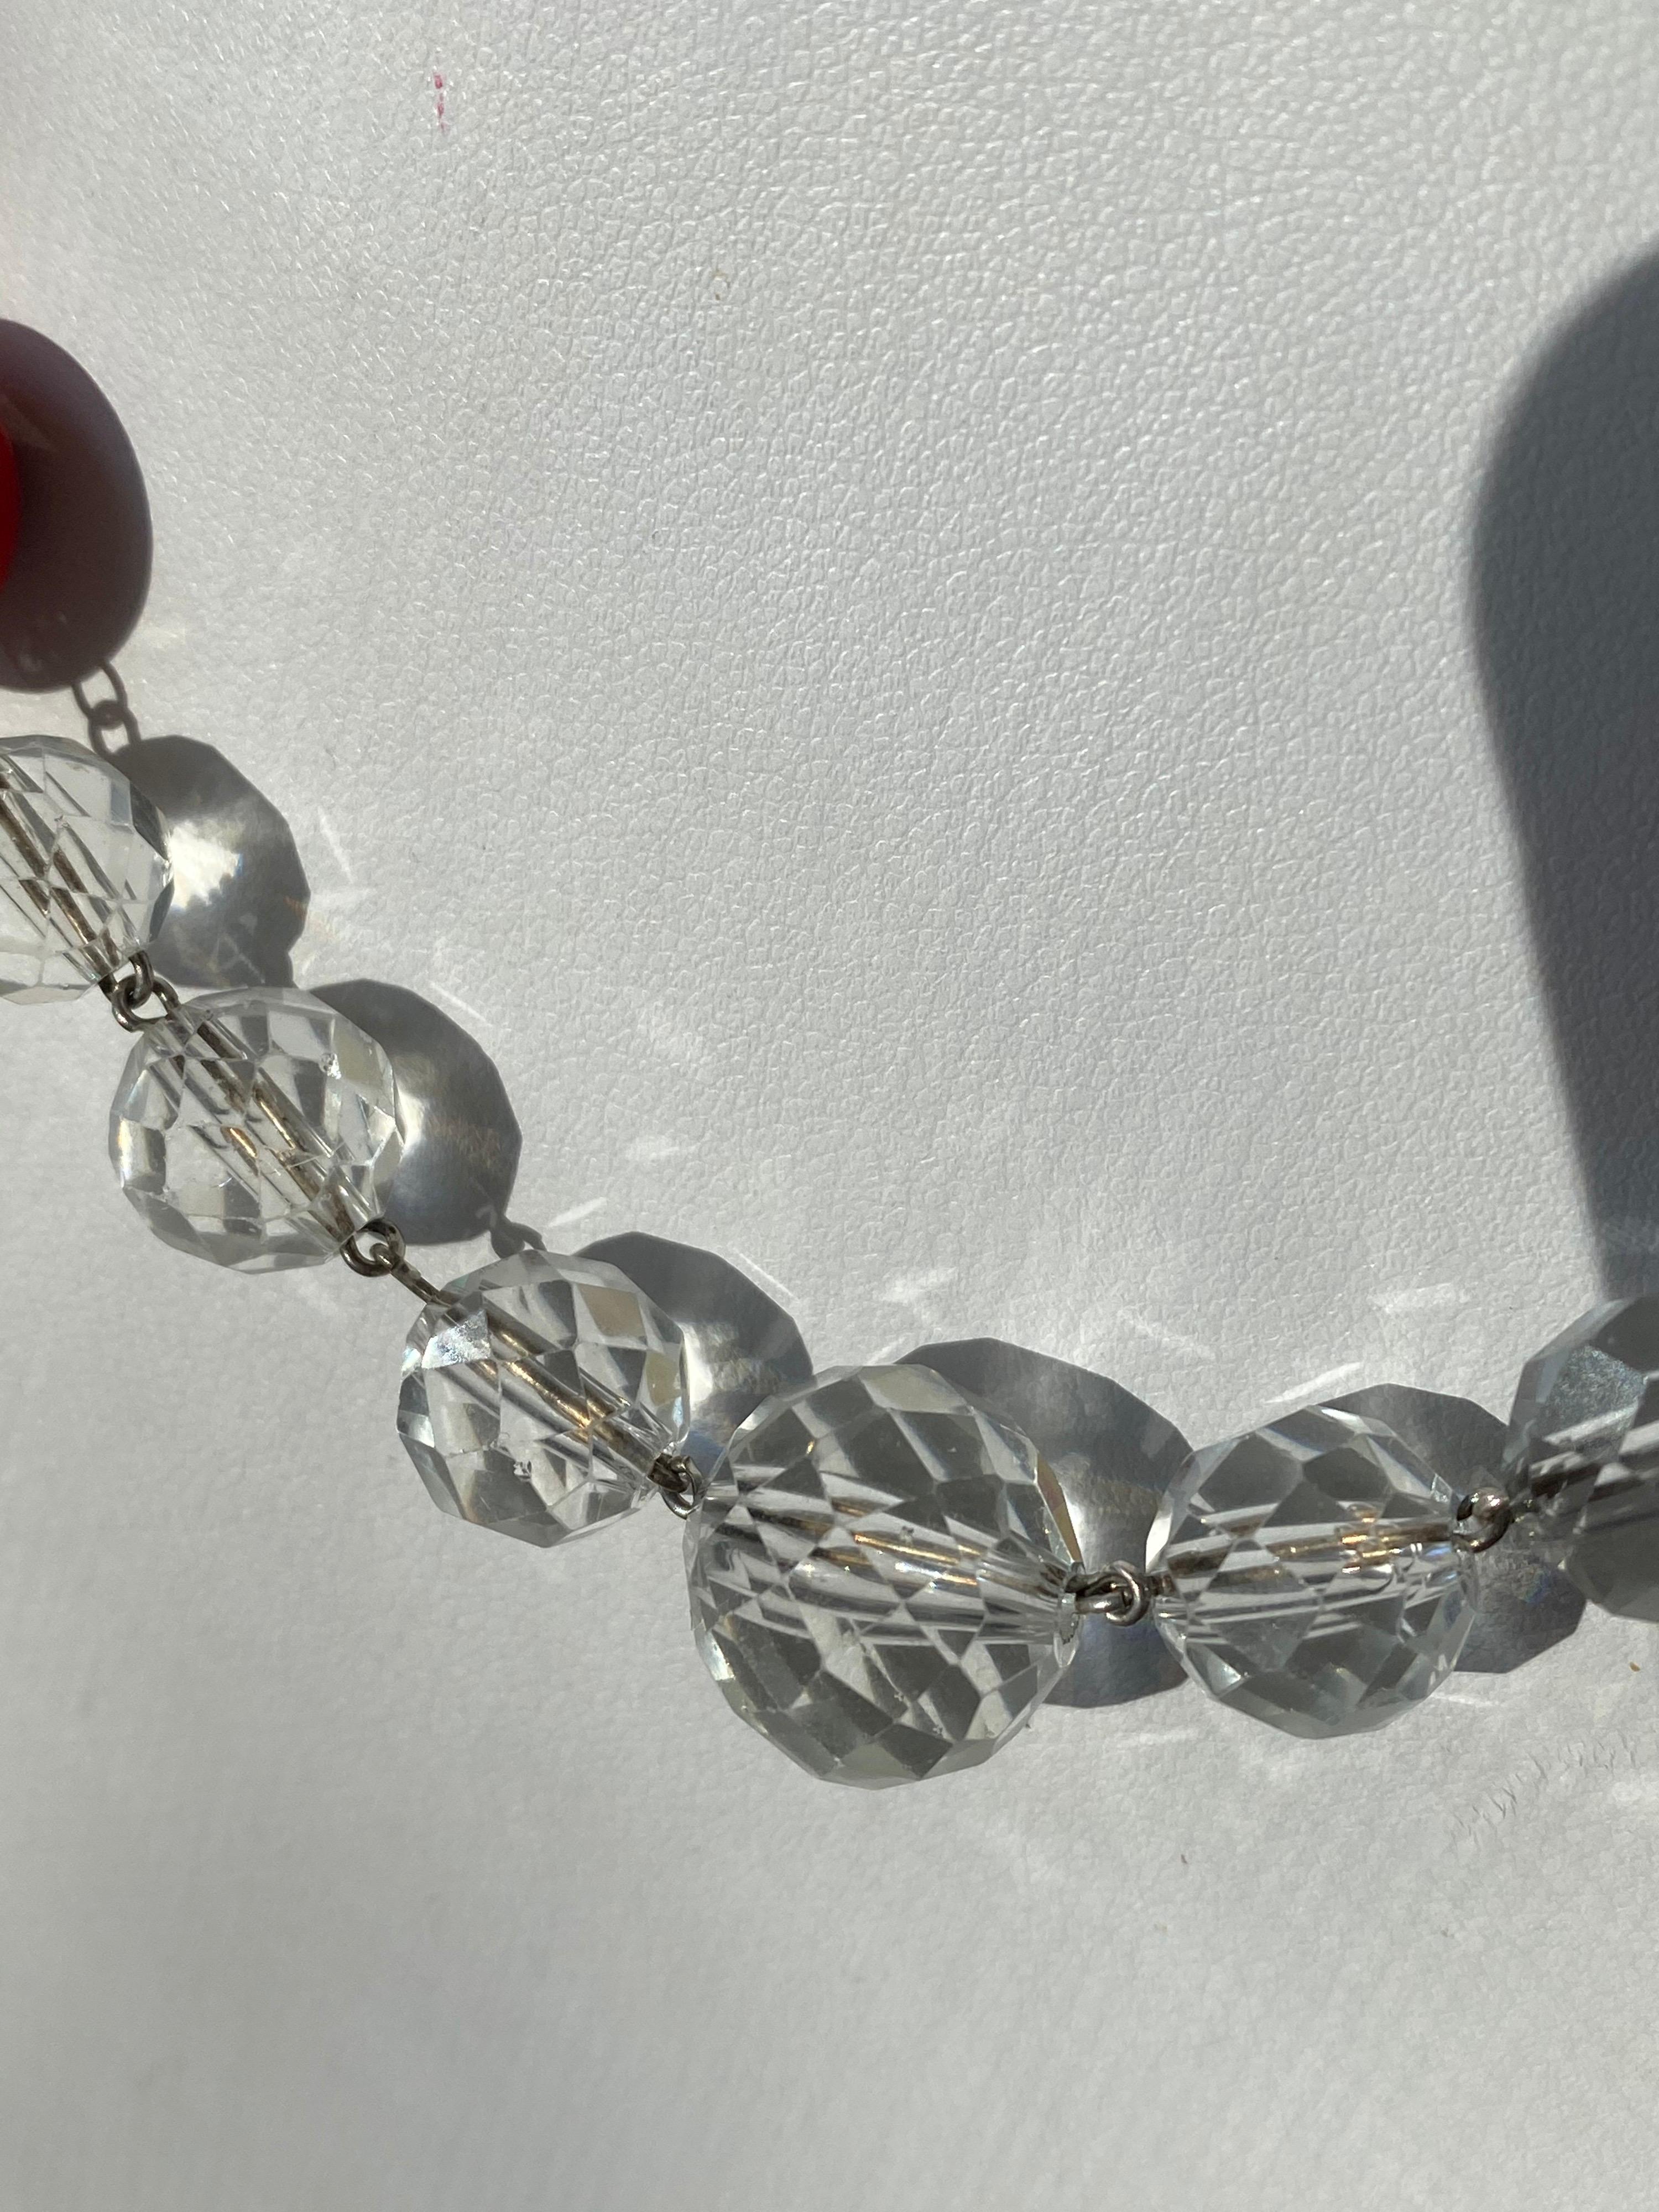 Ladies fashion choker necklace with round coral red beads wire wrapped in Sterling Silver with vintage crystal faceted beads from an old chandelier that comes together with Silver beads and a round Garnet cabochon gemstone bezel set into the